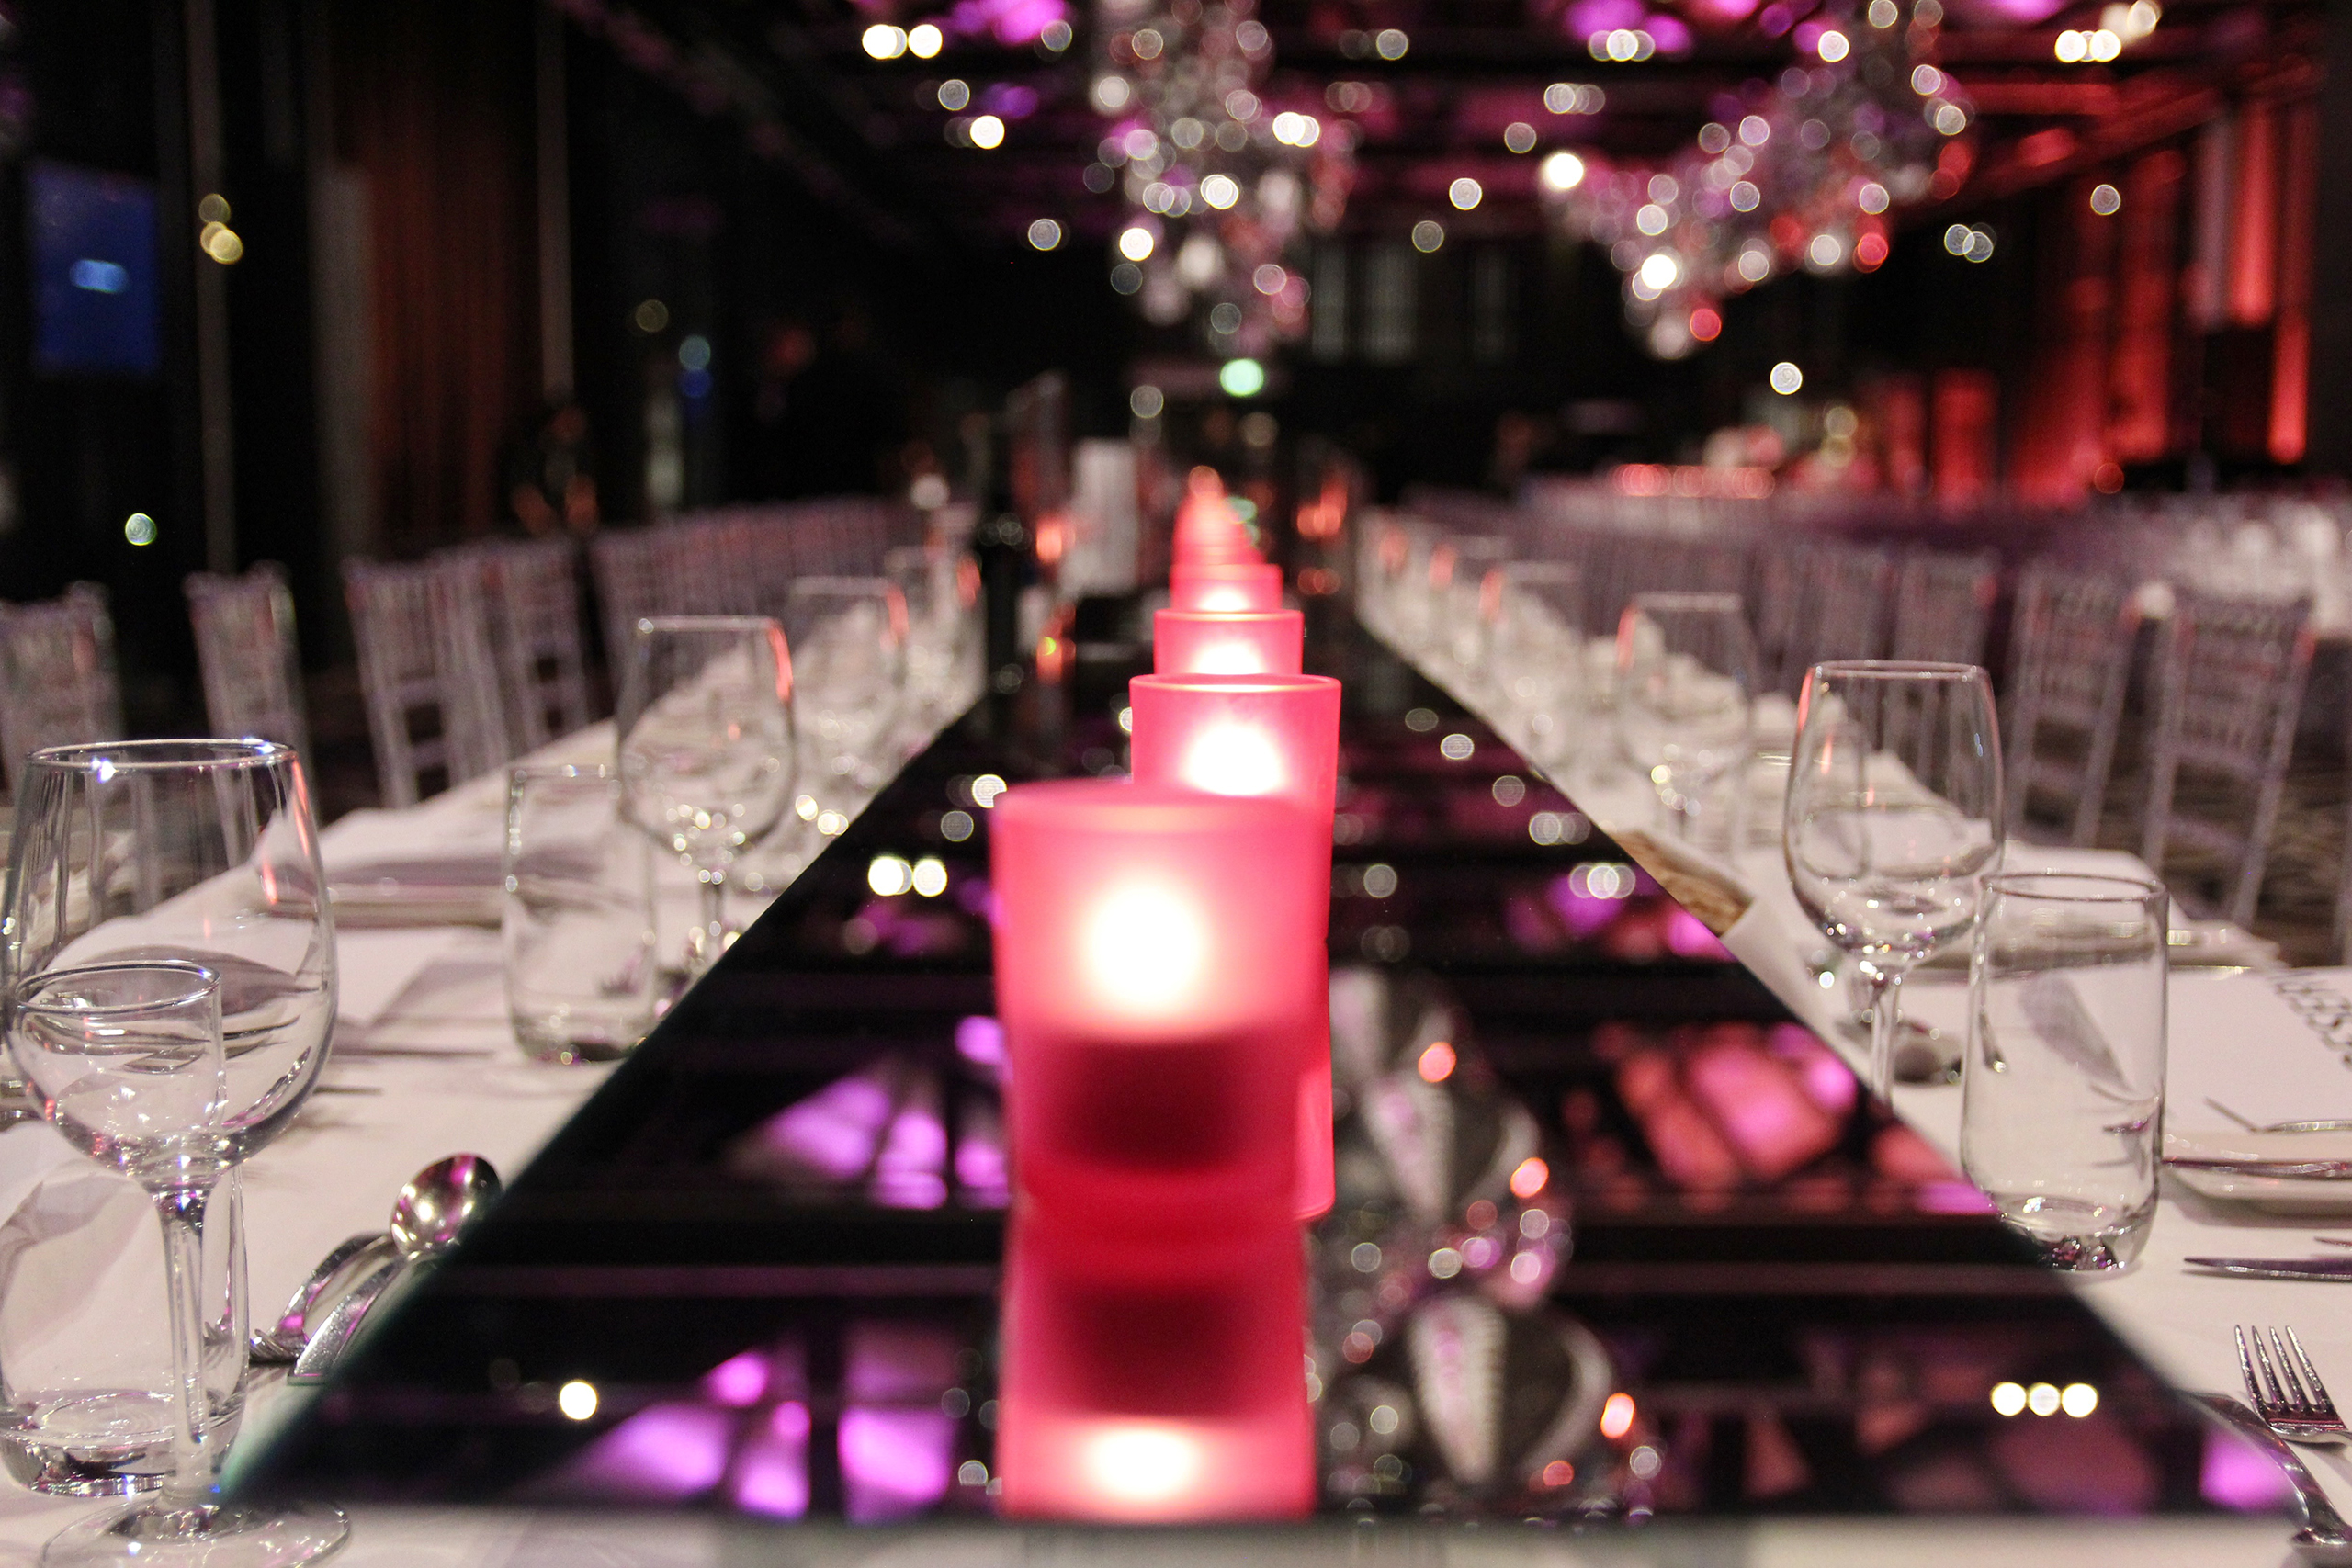 Table setting with pink votives